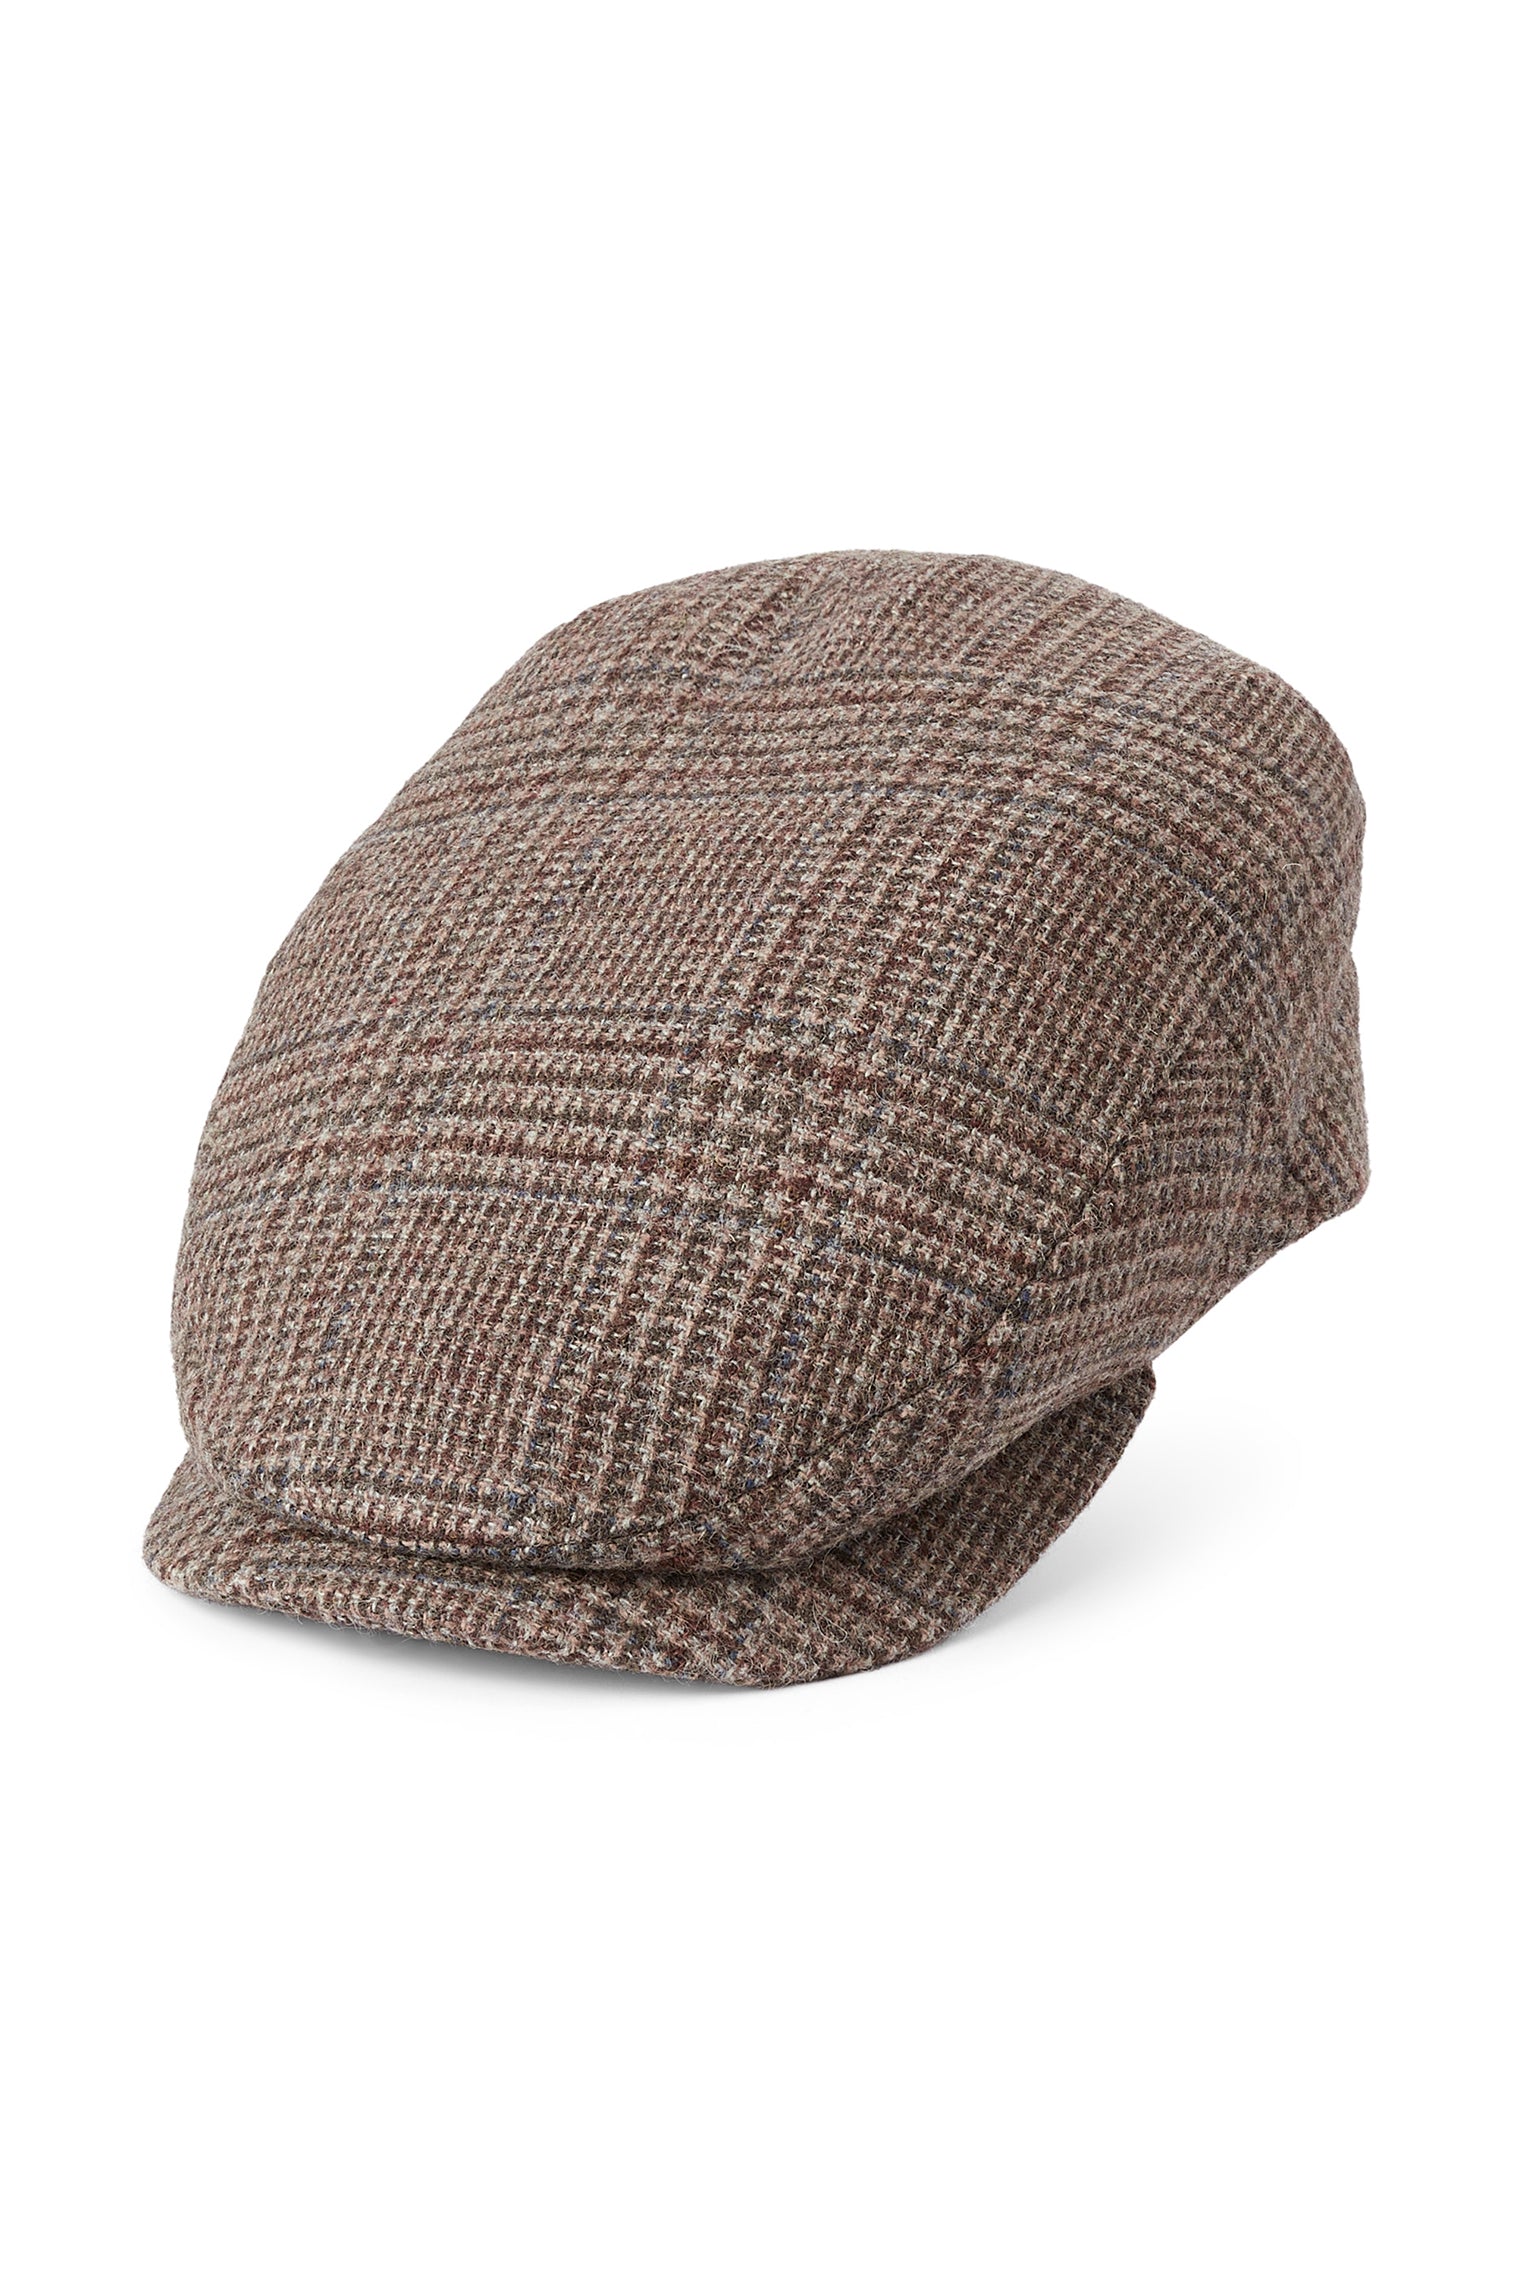 Tweed Flat Caps, Made in Ireland, Page 2 of 3